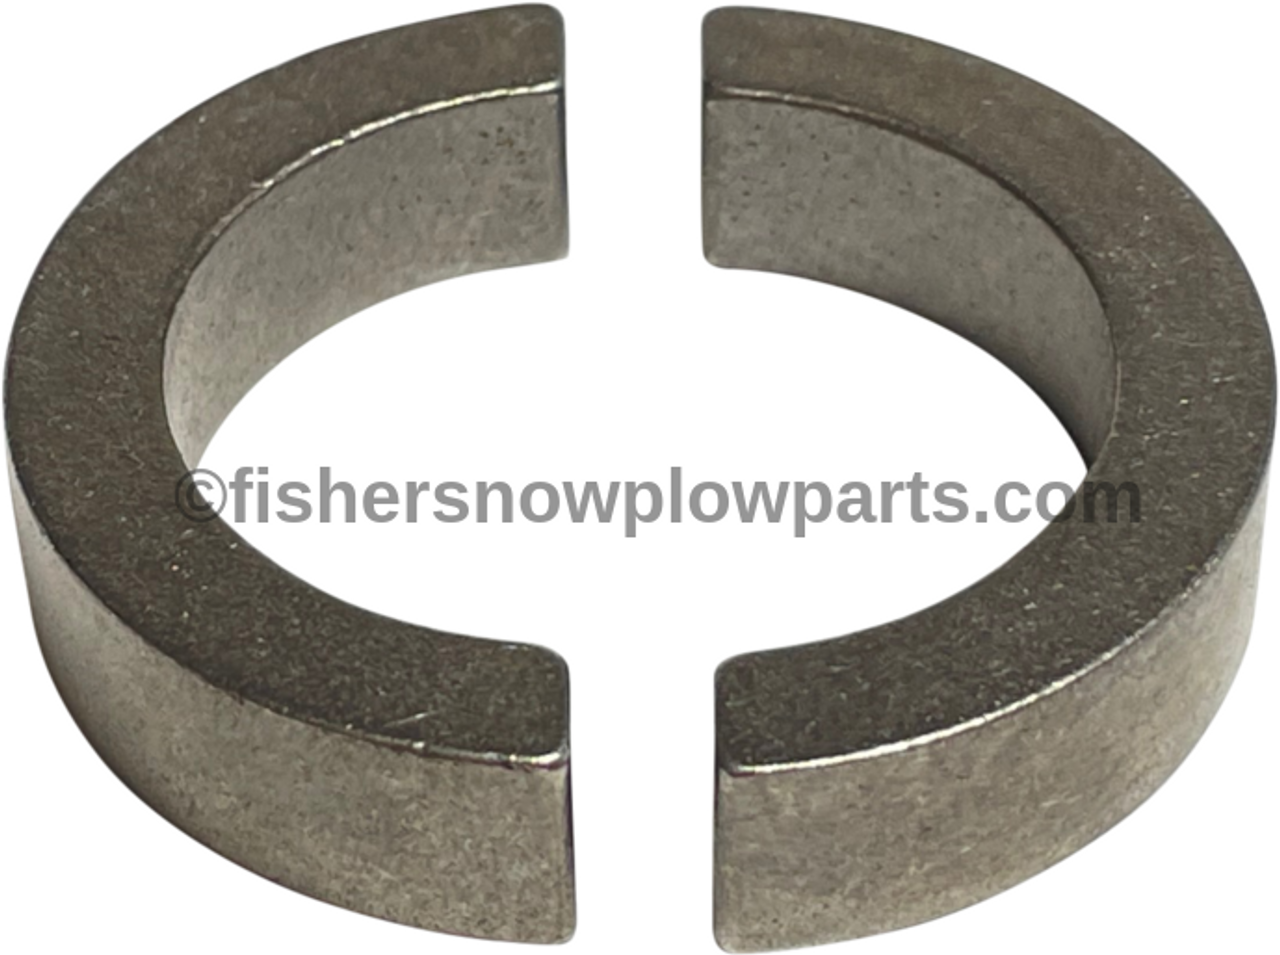 20118K -FISHER SNOW PLOWS GENUINE REPLACEMENT PART - SPLIT BEARING KIT 1 1/2  USED ON 20116K & 20117K, 56600K, 56603K, 69670 RAM ASSEMBLIES OTHER PARTS  COMPATABLE TO THIS: 341K, 20118K, 26981, 56715, 2780K